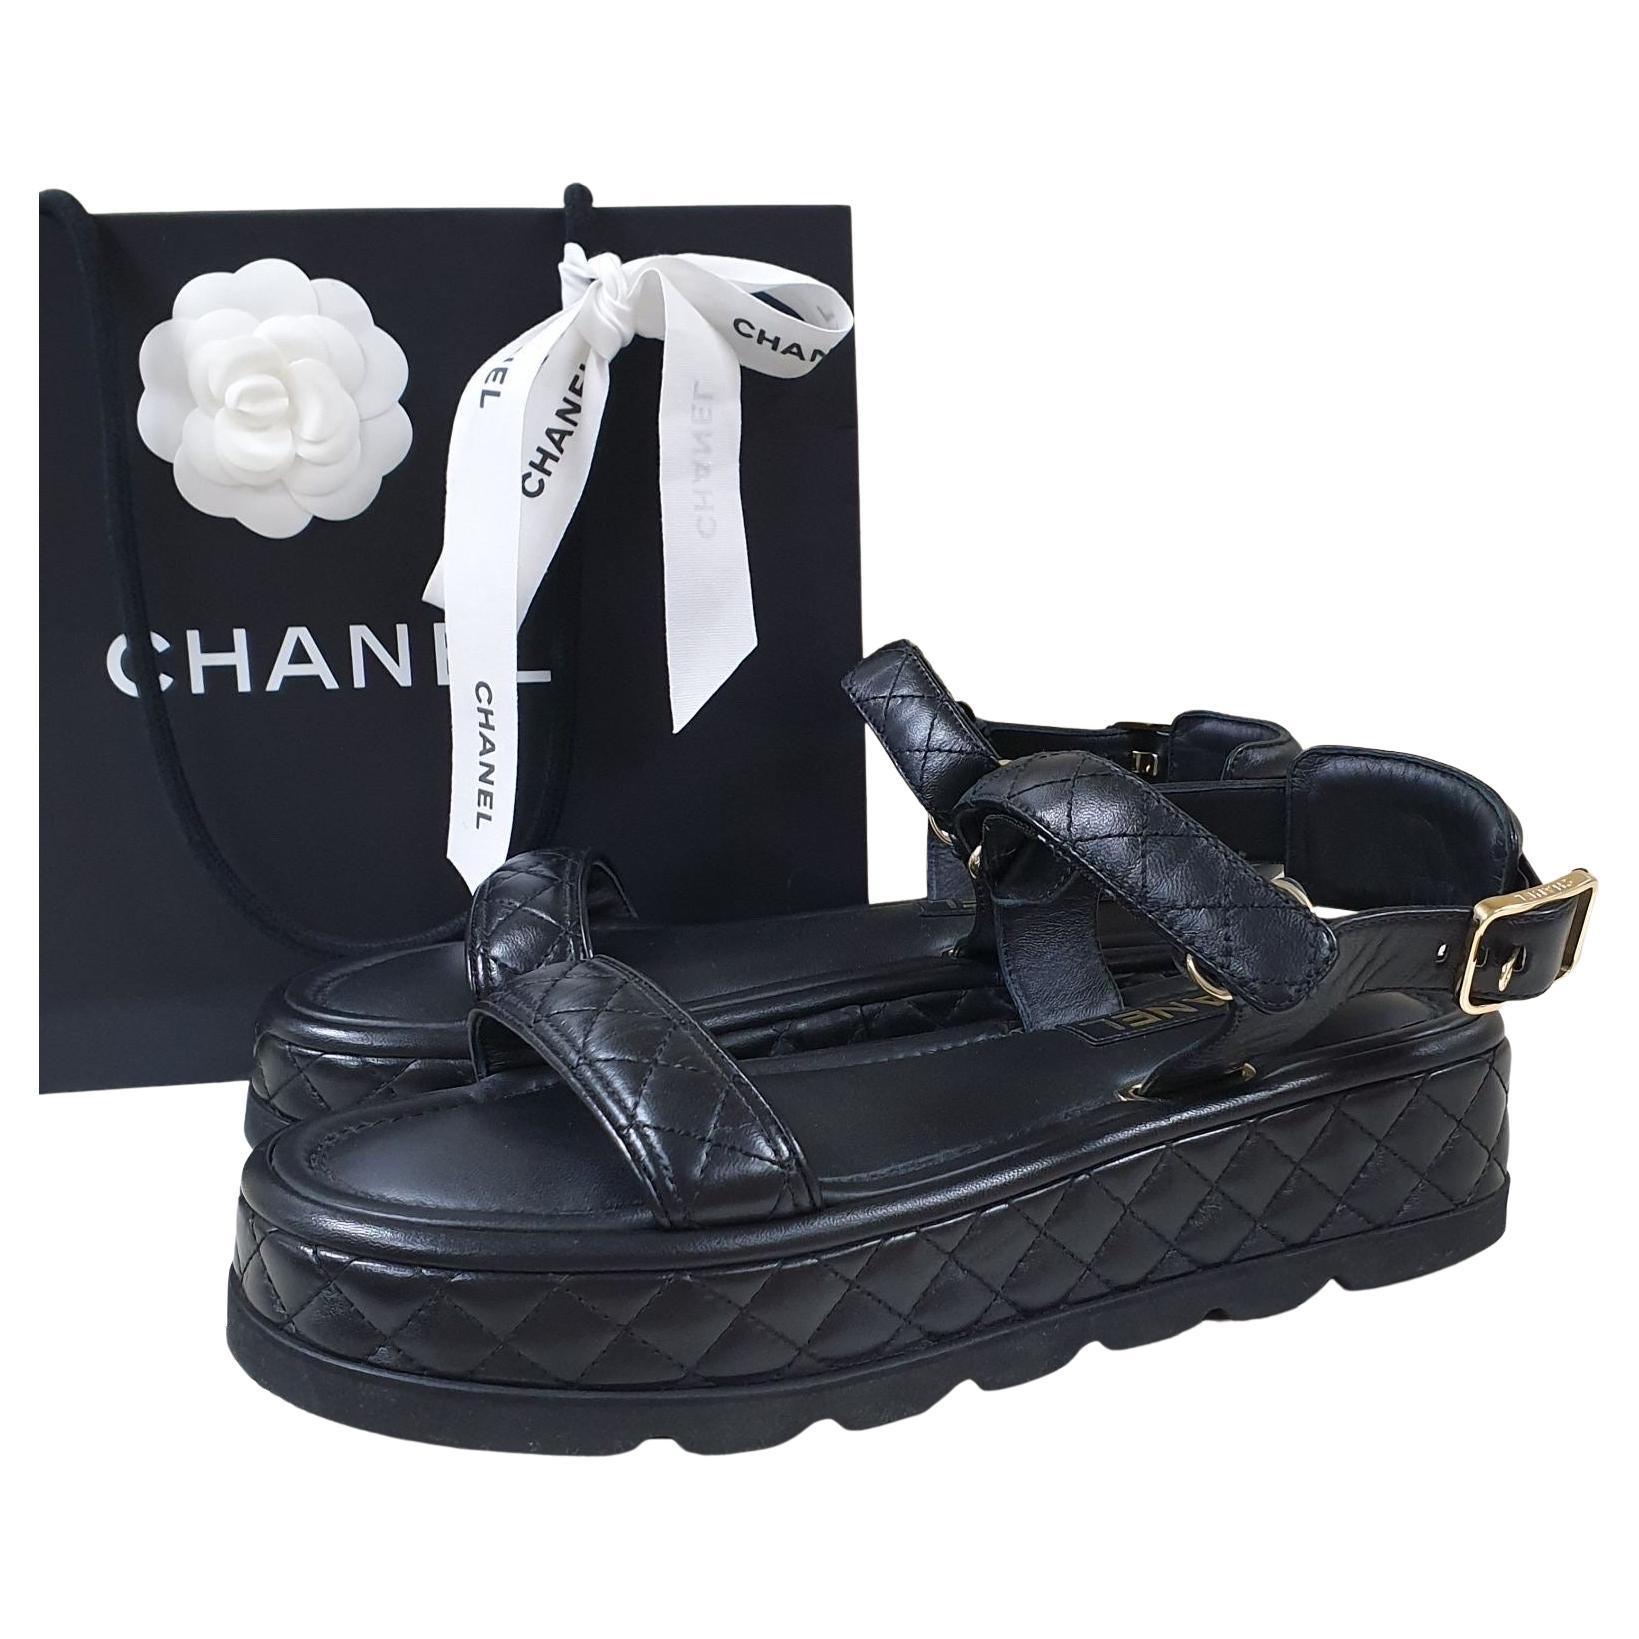 Chanel Black Leather Quilted Low Wedge Sandals